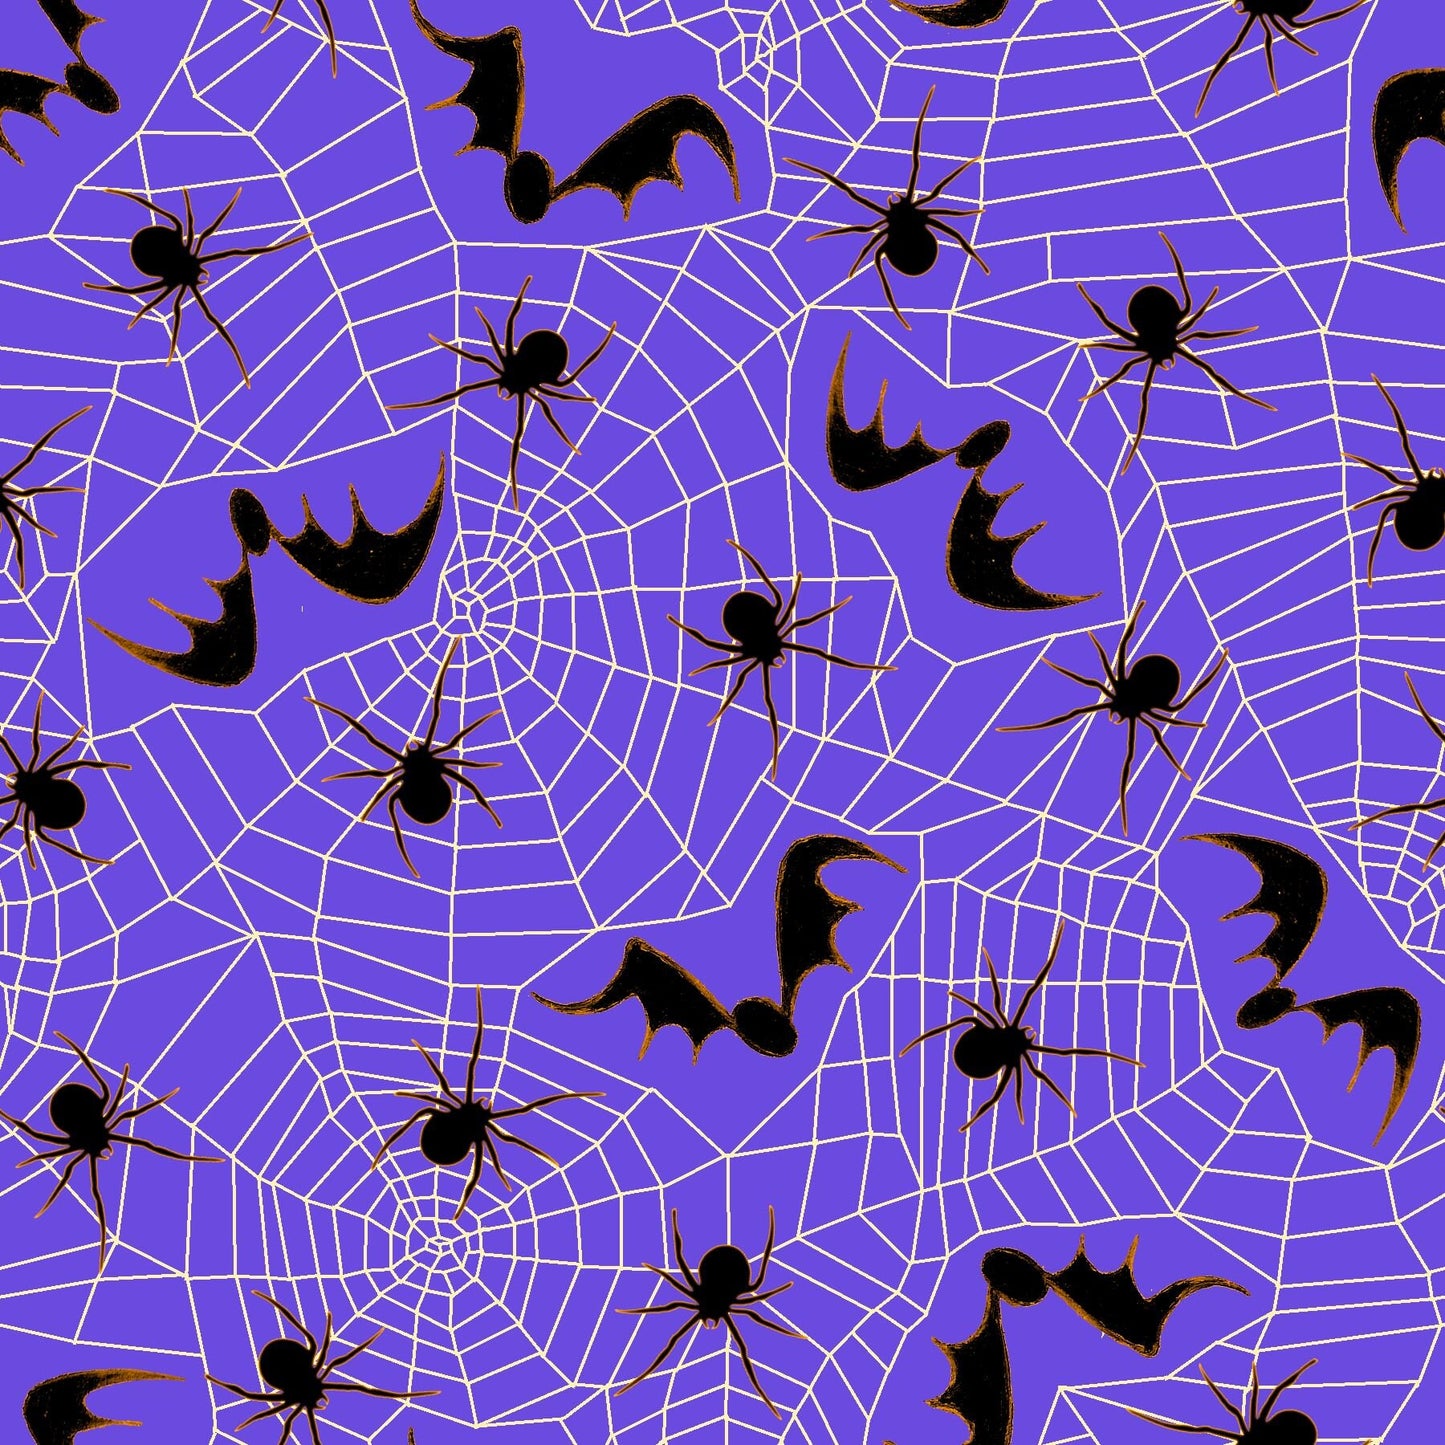 Witchful Thinking by David Galchutt Spiders and Spiderwebs Purple 1539-55 Cotton Woven Fabric